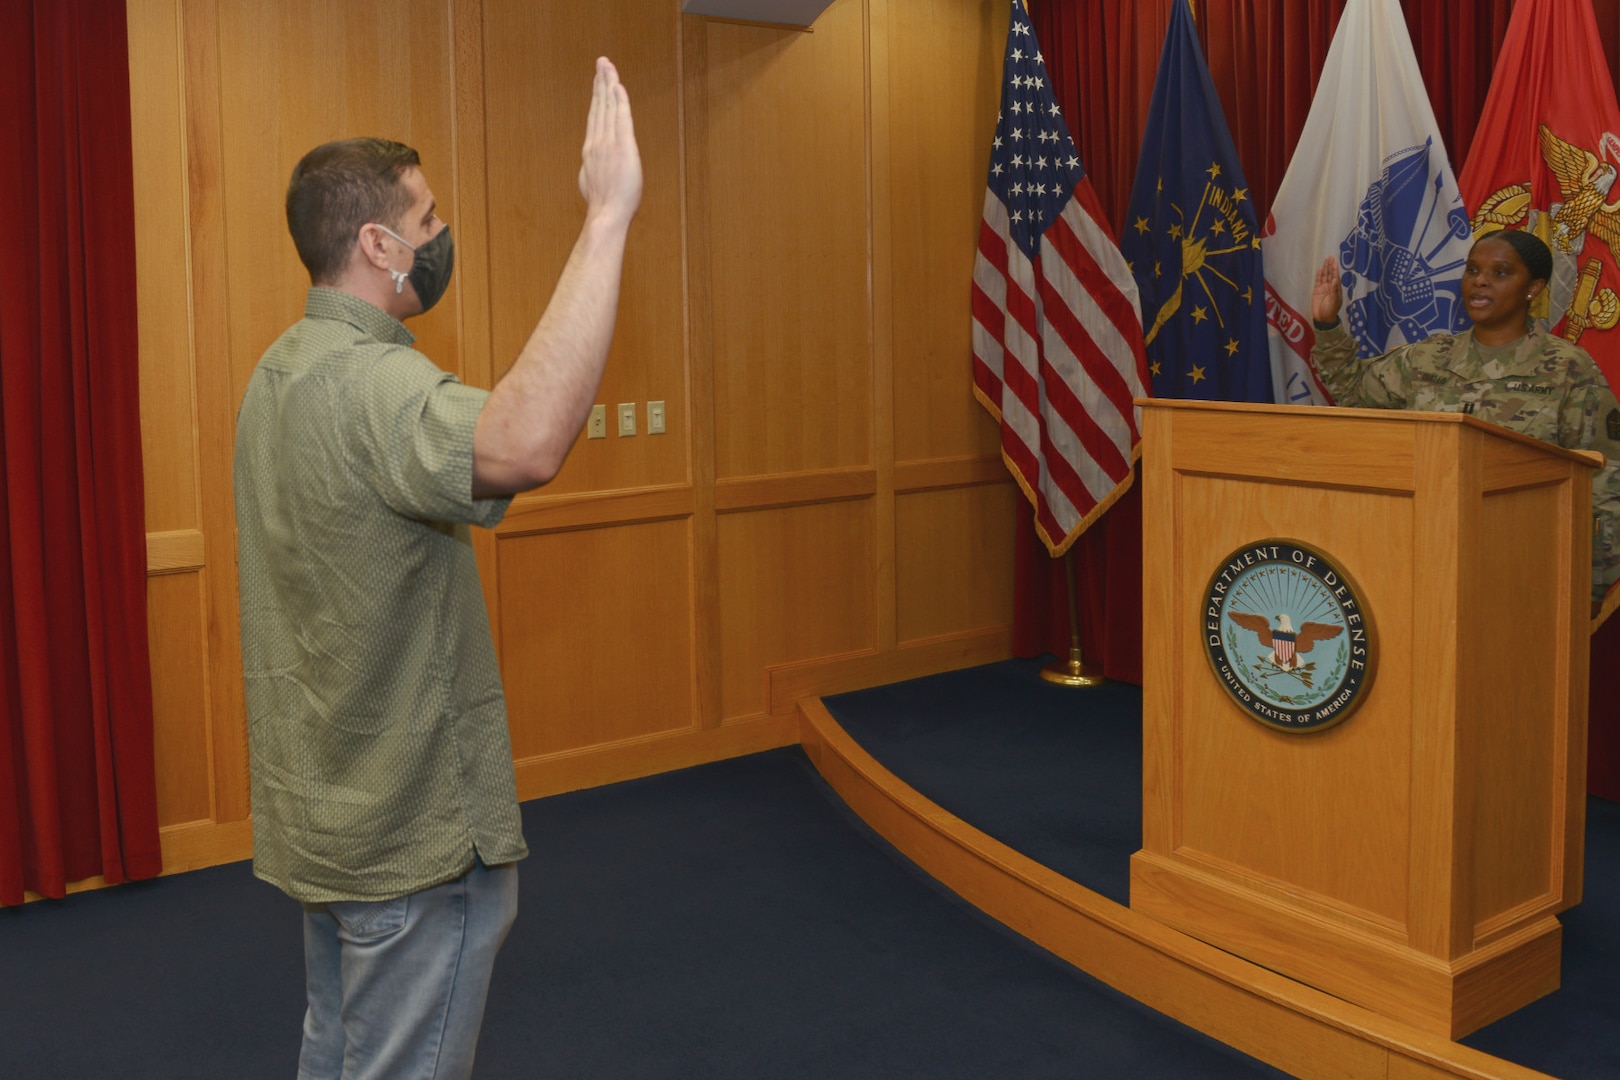 Recruit Mohammad Zaki Ahmadi swears into the Indiana National Guard as U.S. Army Capt. Aissata Diallo administers the oath of enlistment in Indianapolis March 3, 2022. Ahmadi was one of approximately 7,000 Afghan evacuees who filtered through Camp Atterbury as part of Operation Allies Welcome.